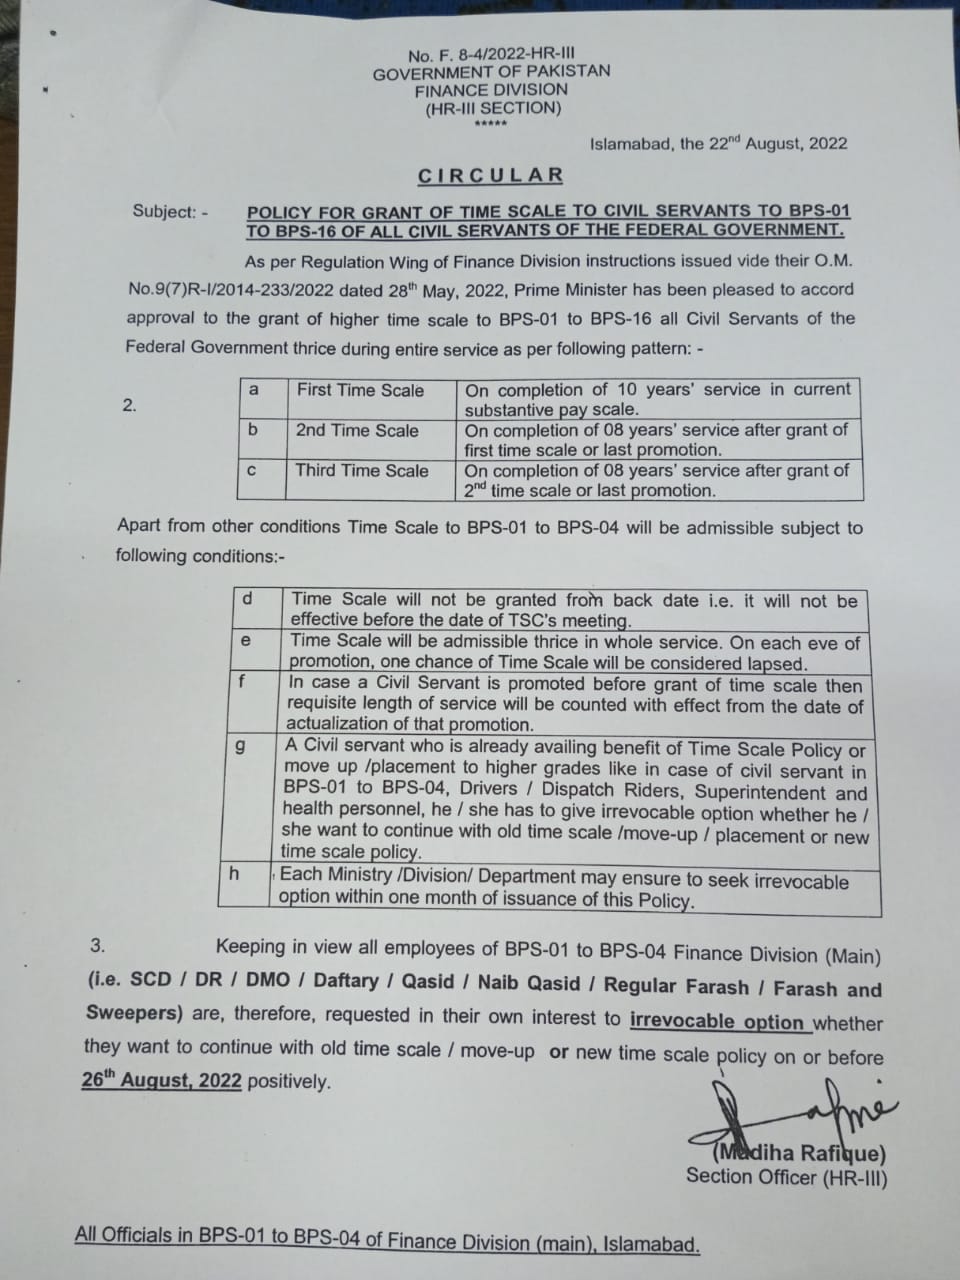 Policy for Grant of Time Scale BPS-01 to BPS-16 Federal Employees